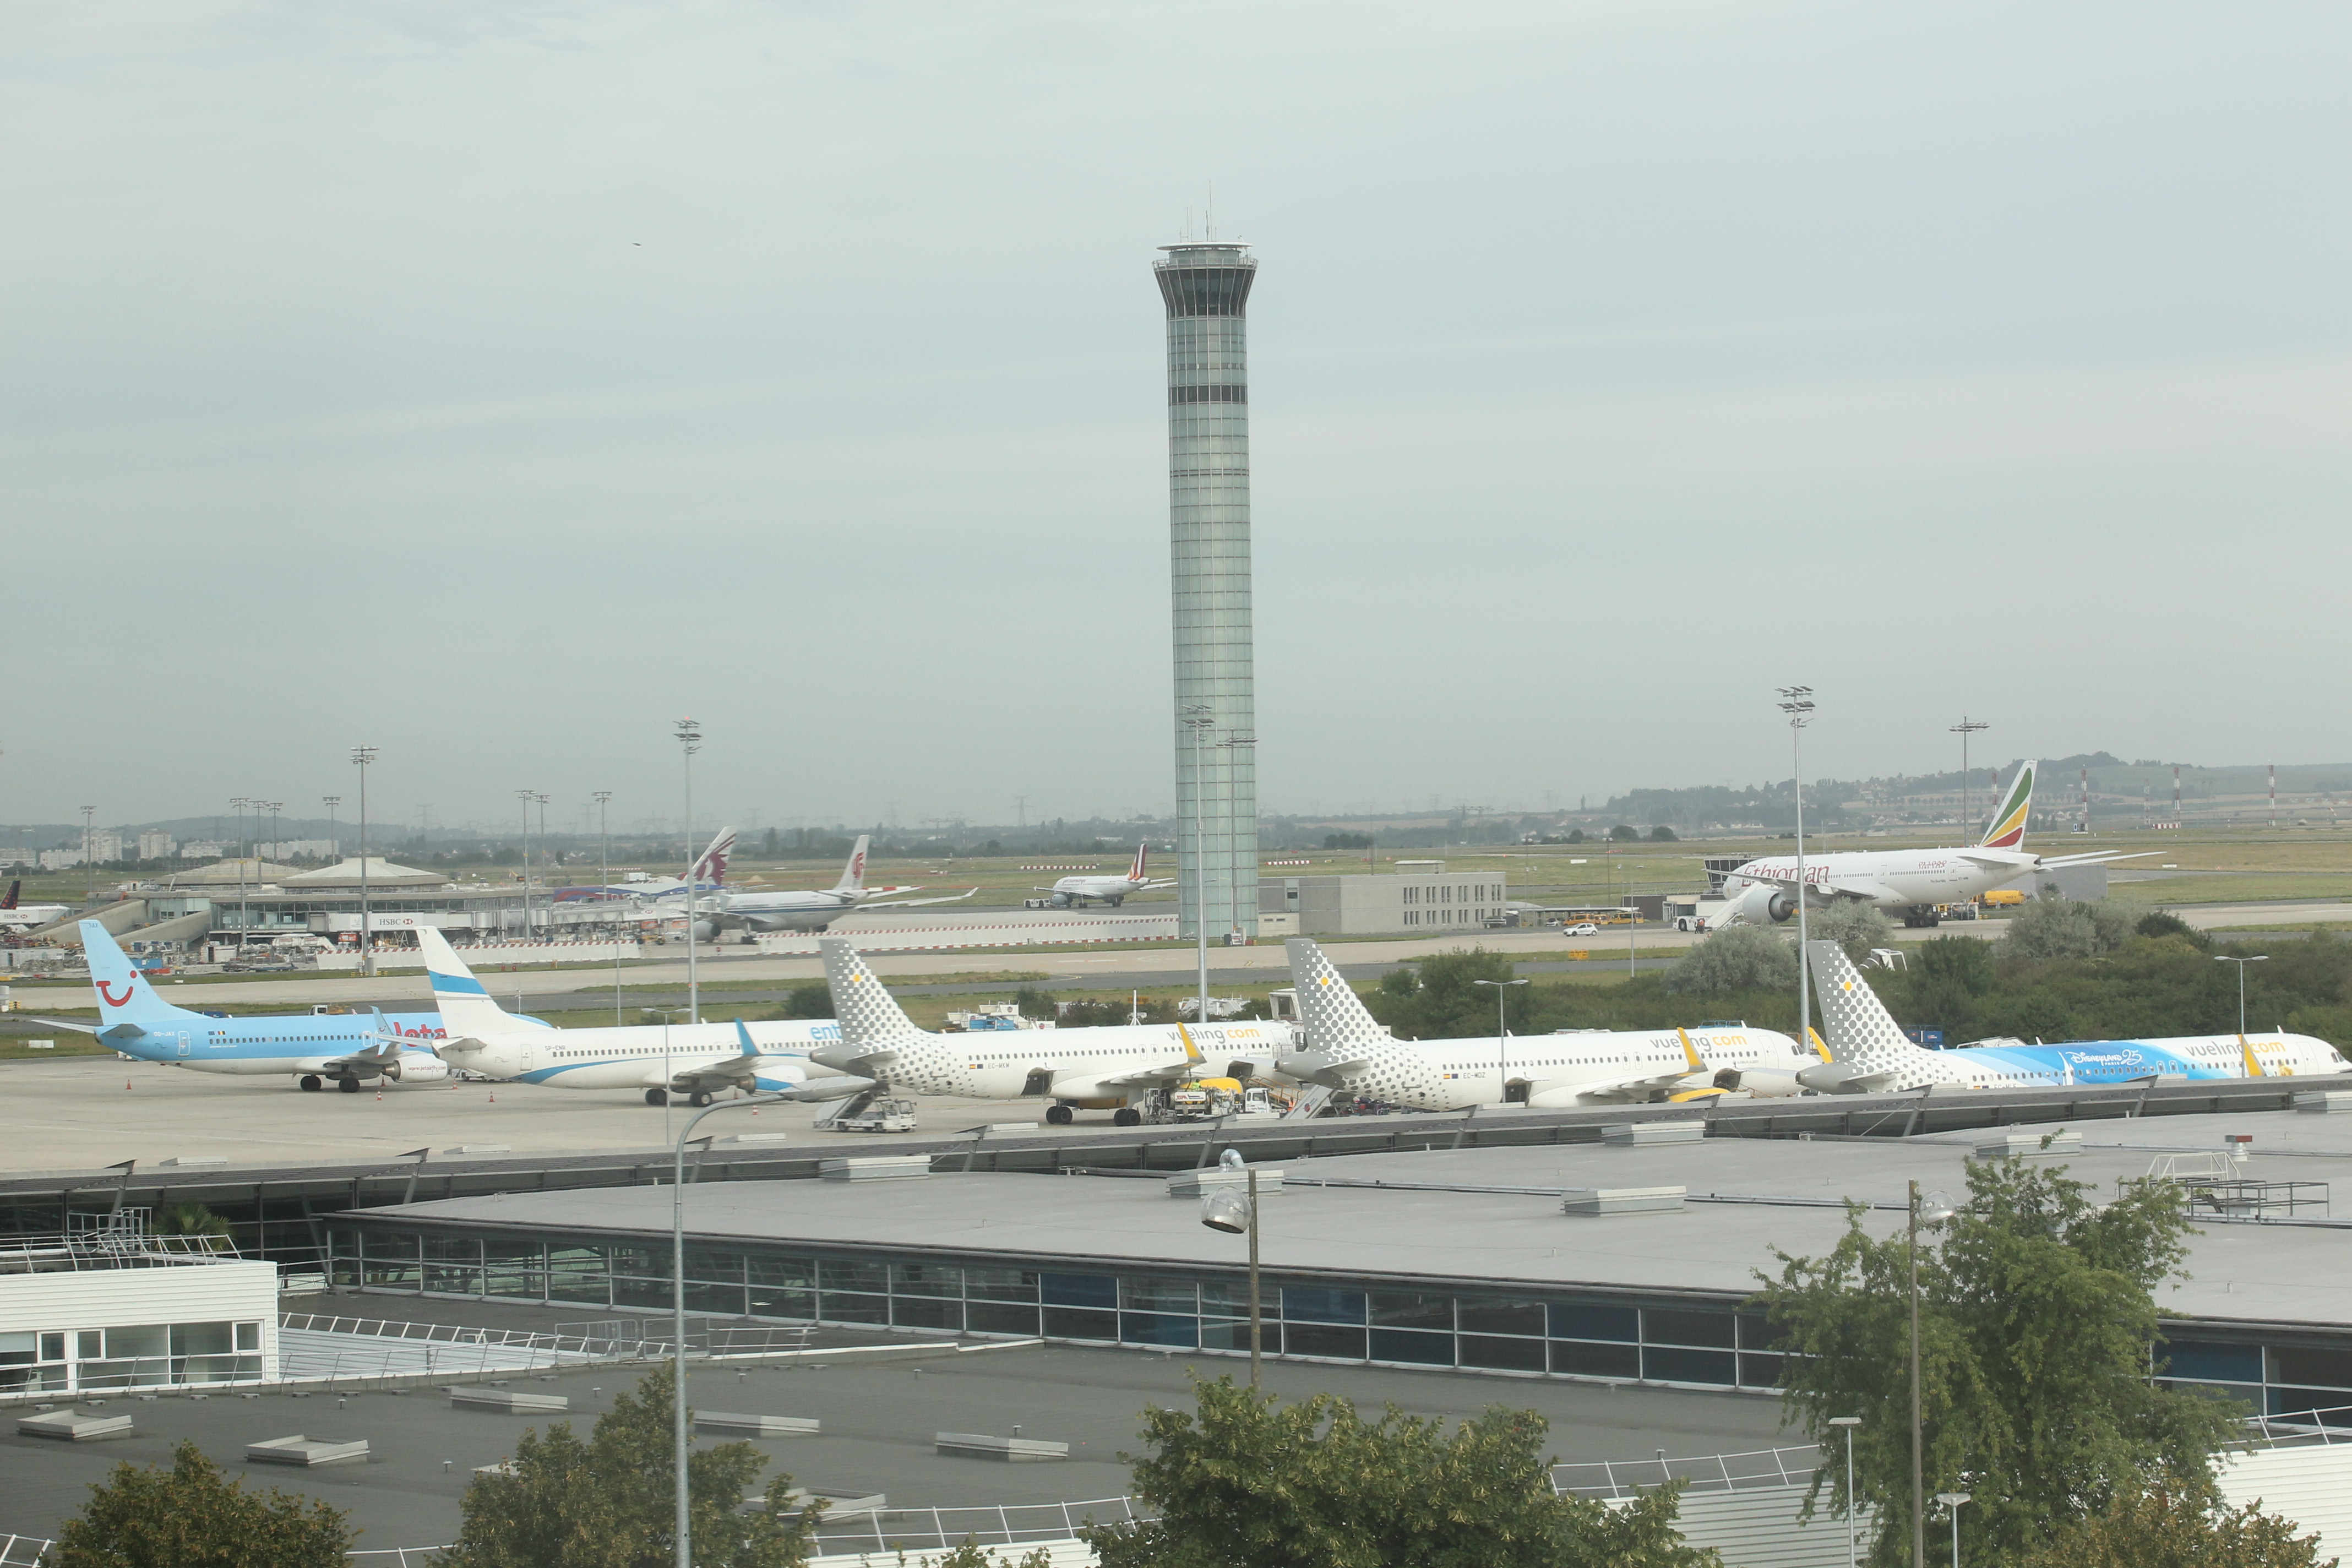 Complete Guide to Spotting at Paris Charles de Gaulle Airport